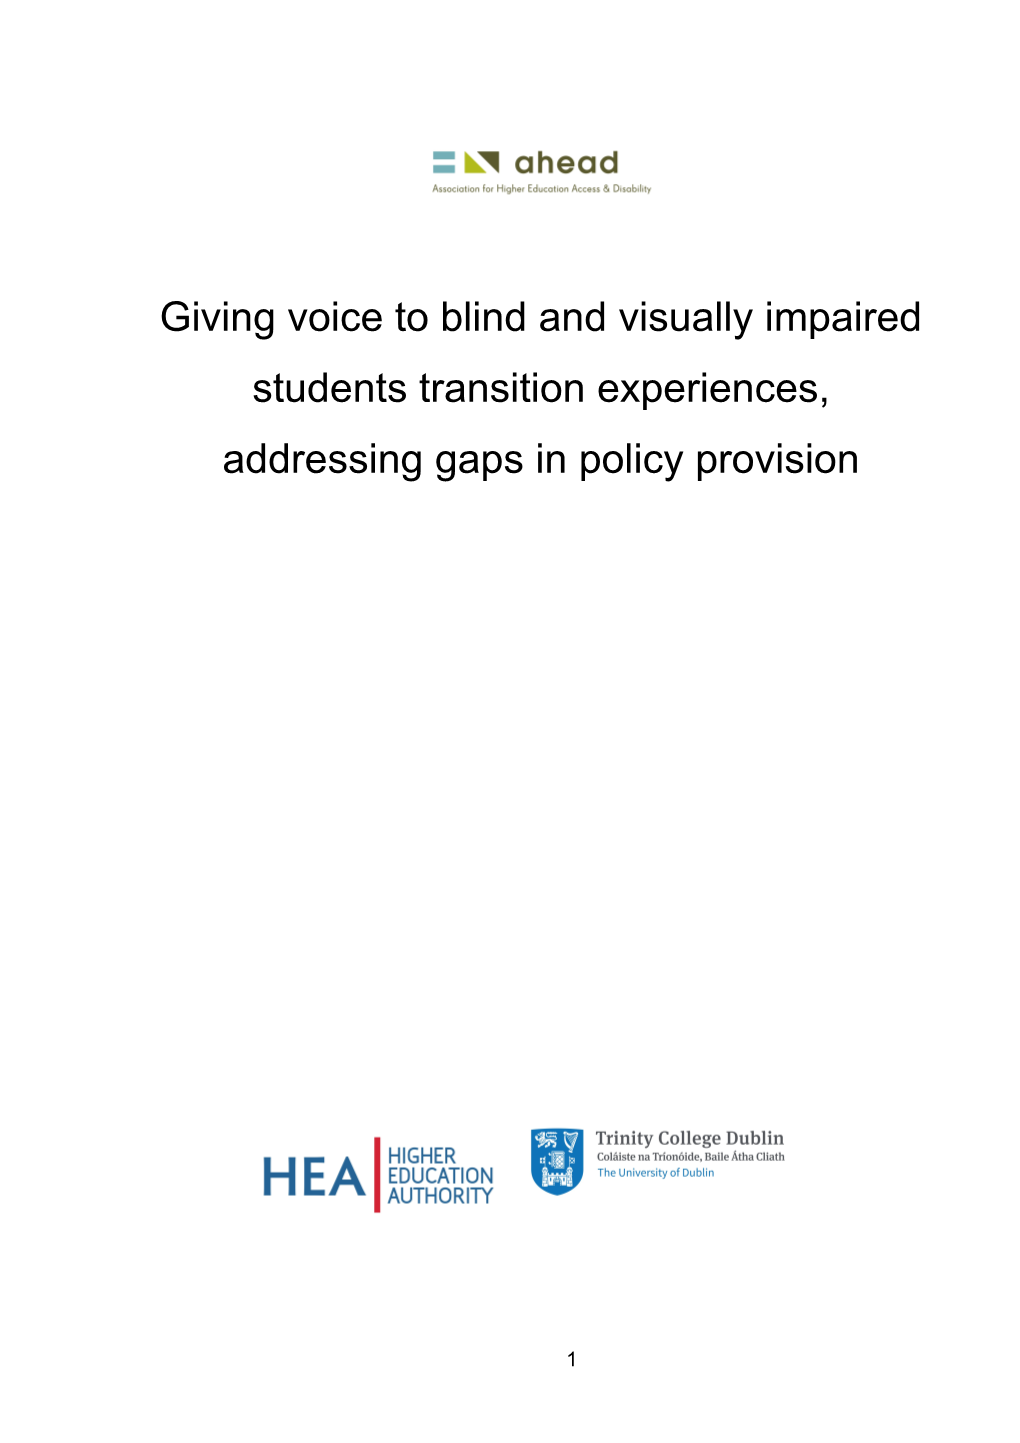 Giving Voice to Blind and Visually Impaired Students Transition Experiences, Addressing